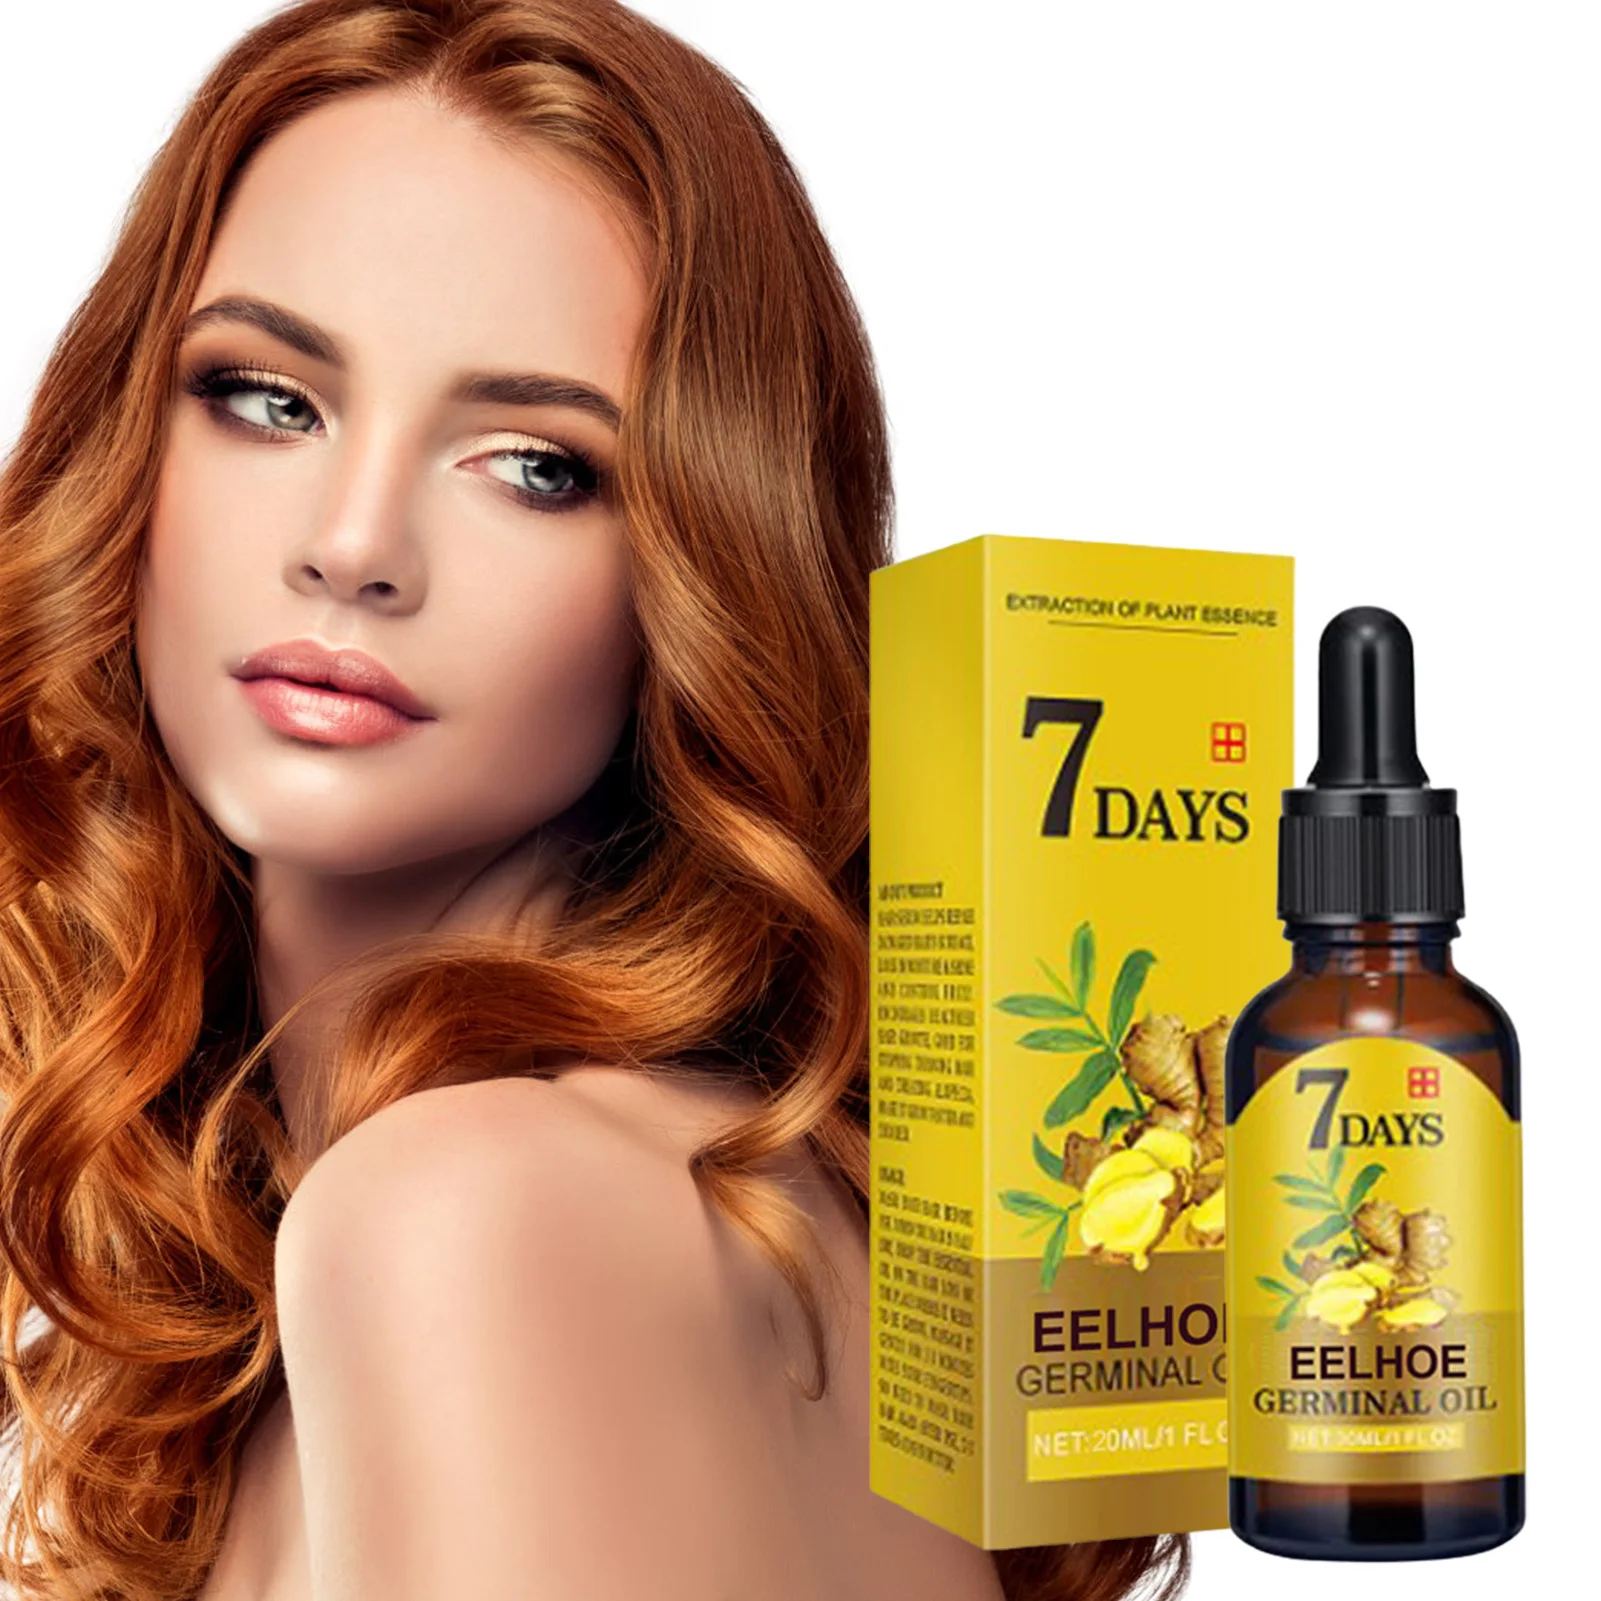 Buy 10 DAYS HAIR OIL (ORIGINAL) Online @ ₹1399 from ShopClues